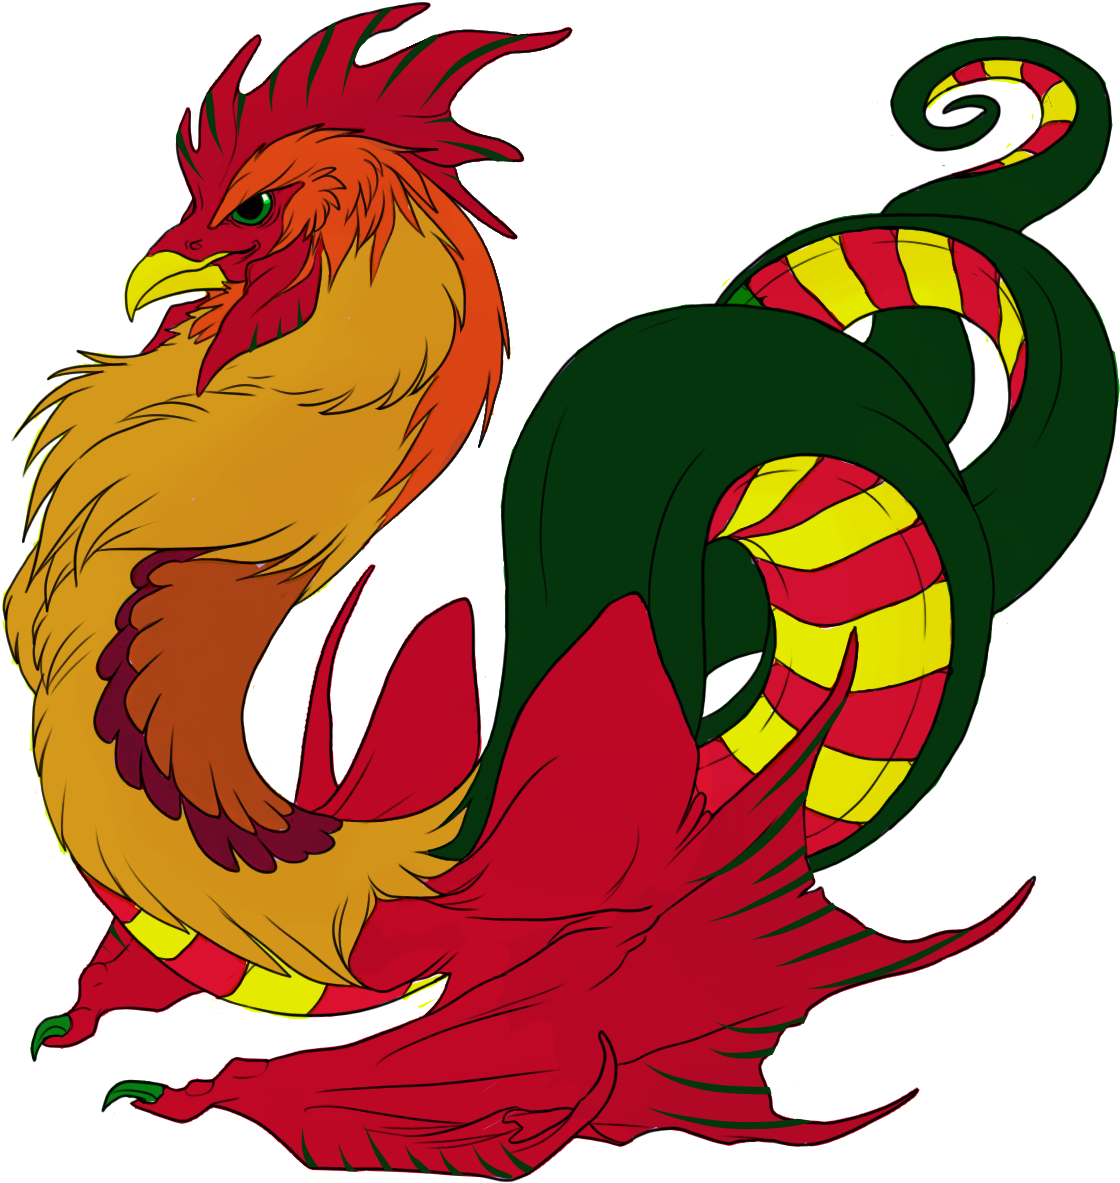 Snaster Nice And Simple Rooster And Snake Colors, Think - Cockatrice Flight Rising (1200x1200)